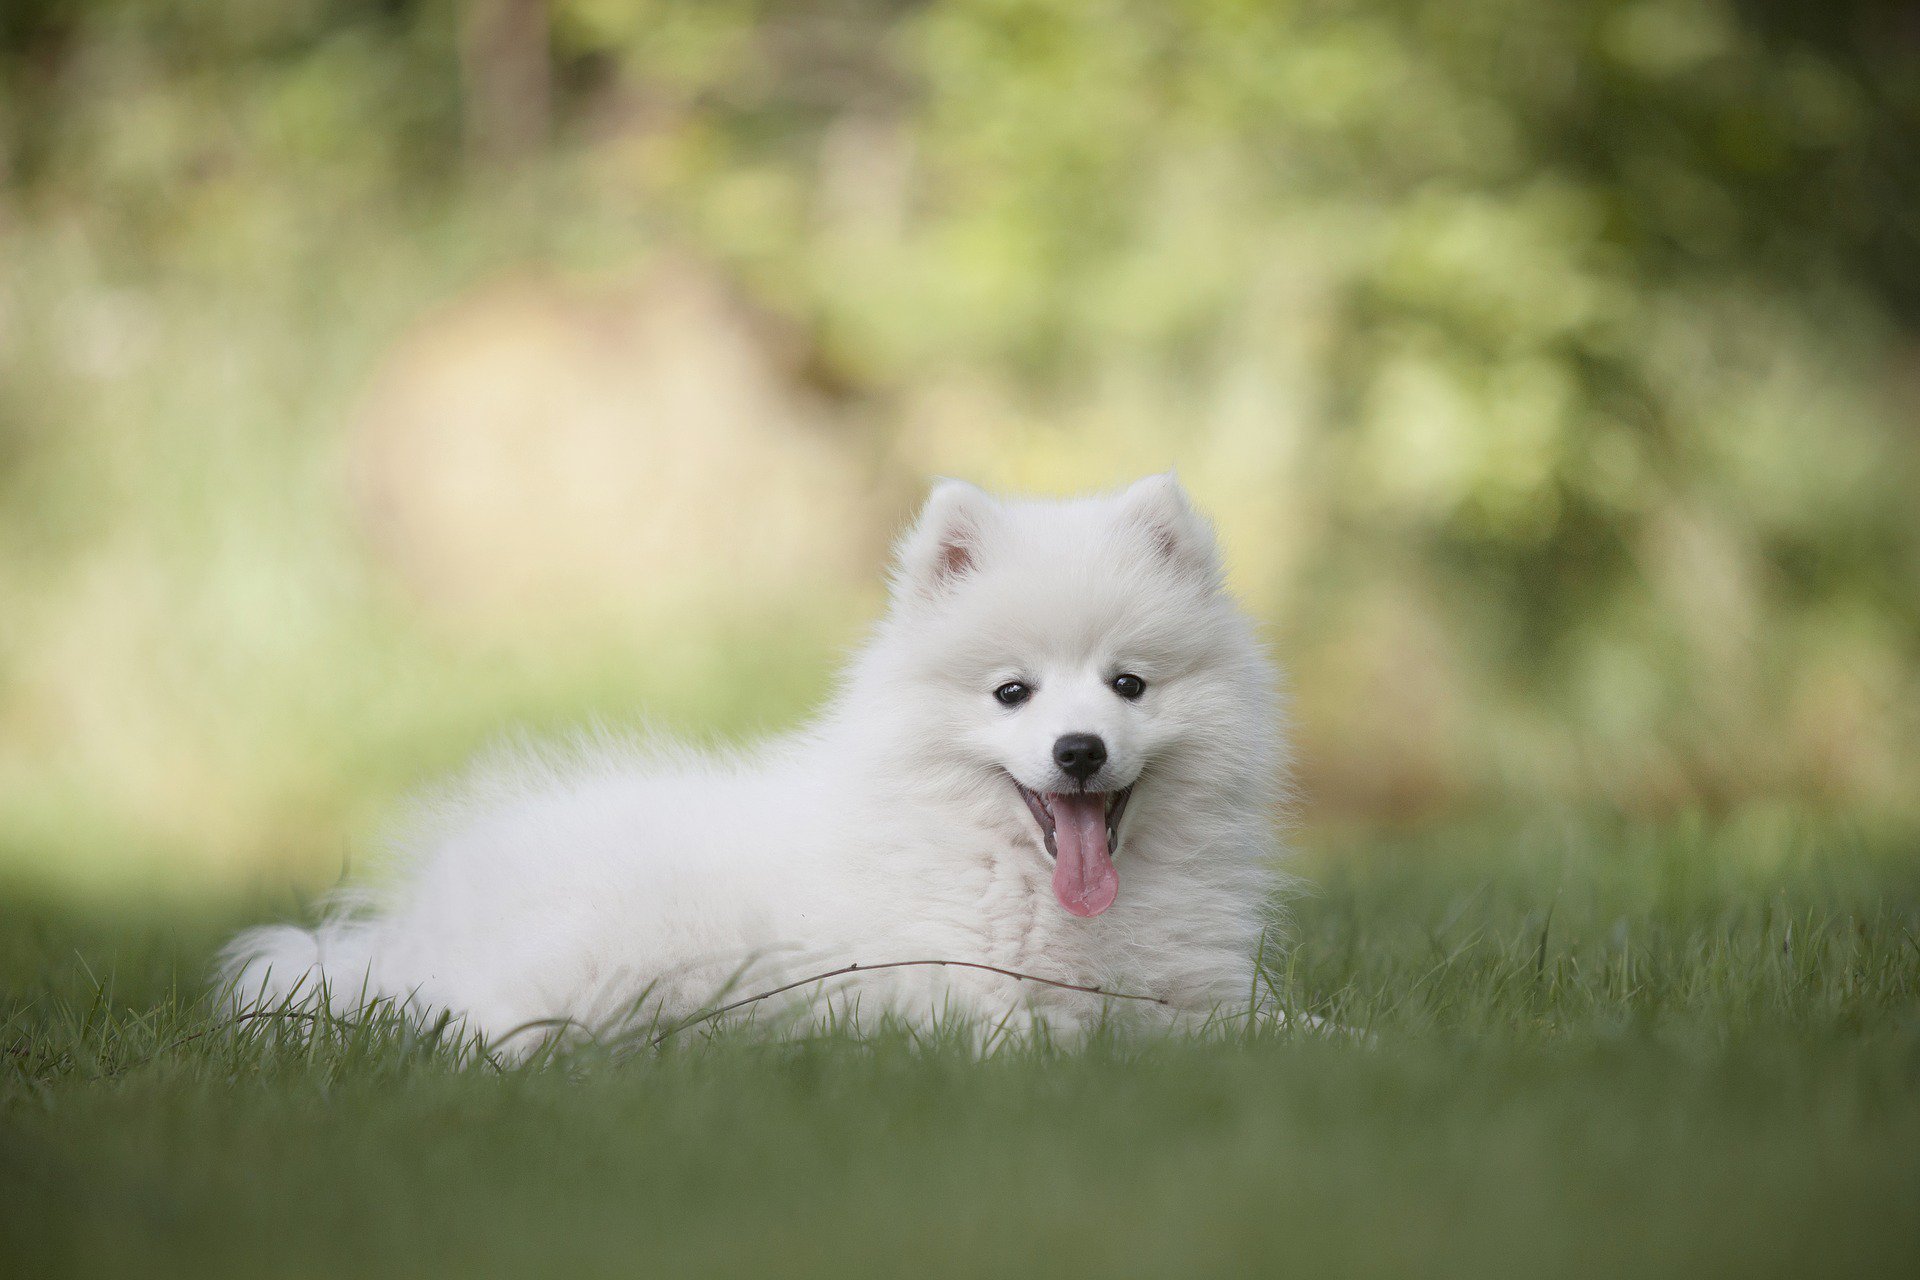 Cute White Dog Wallpapers